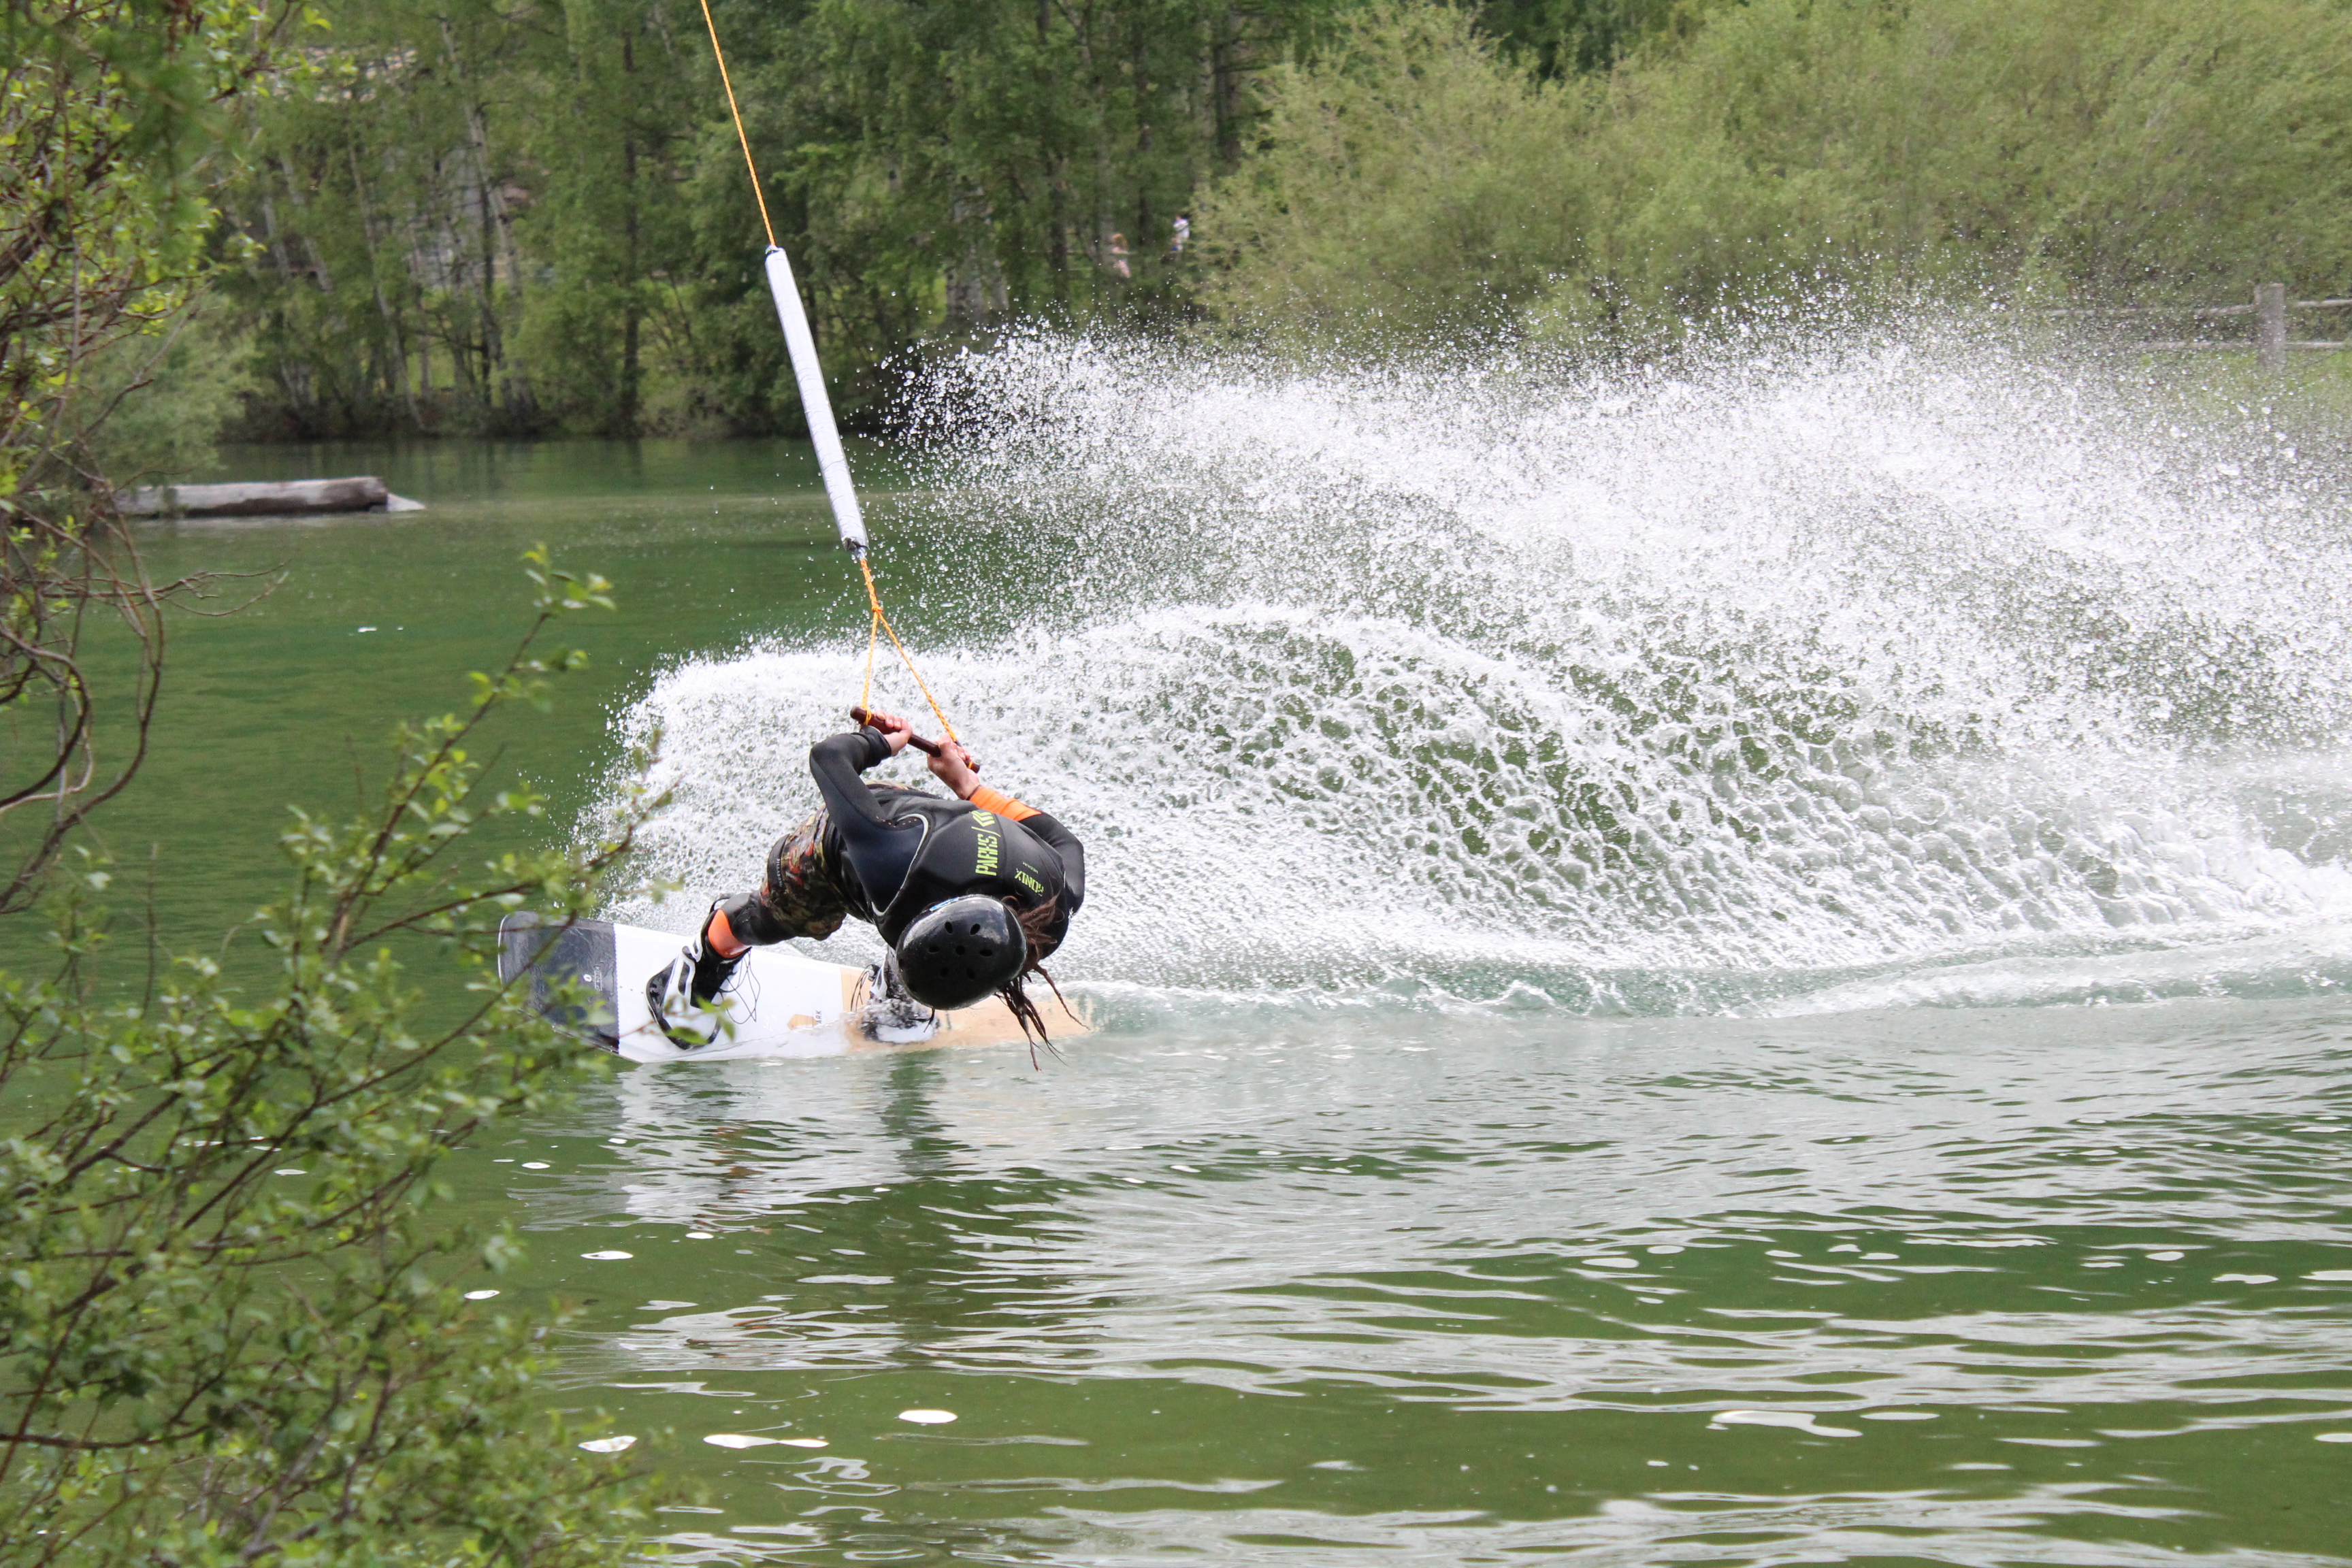 Wakeboarder in action